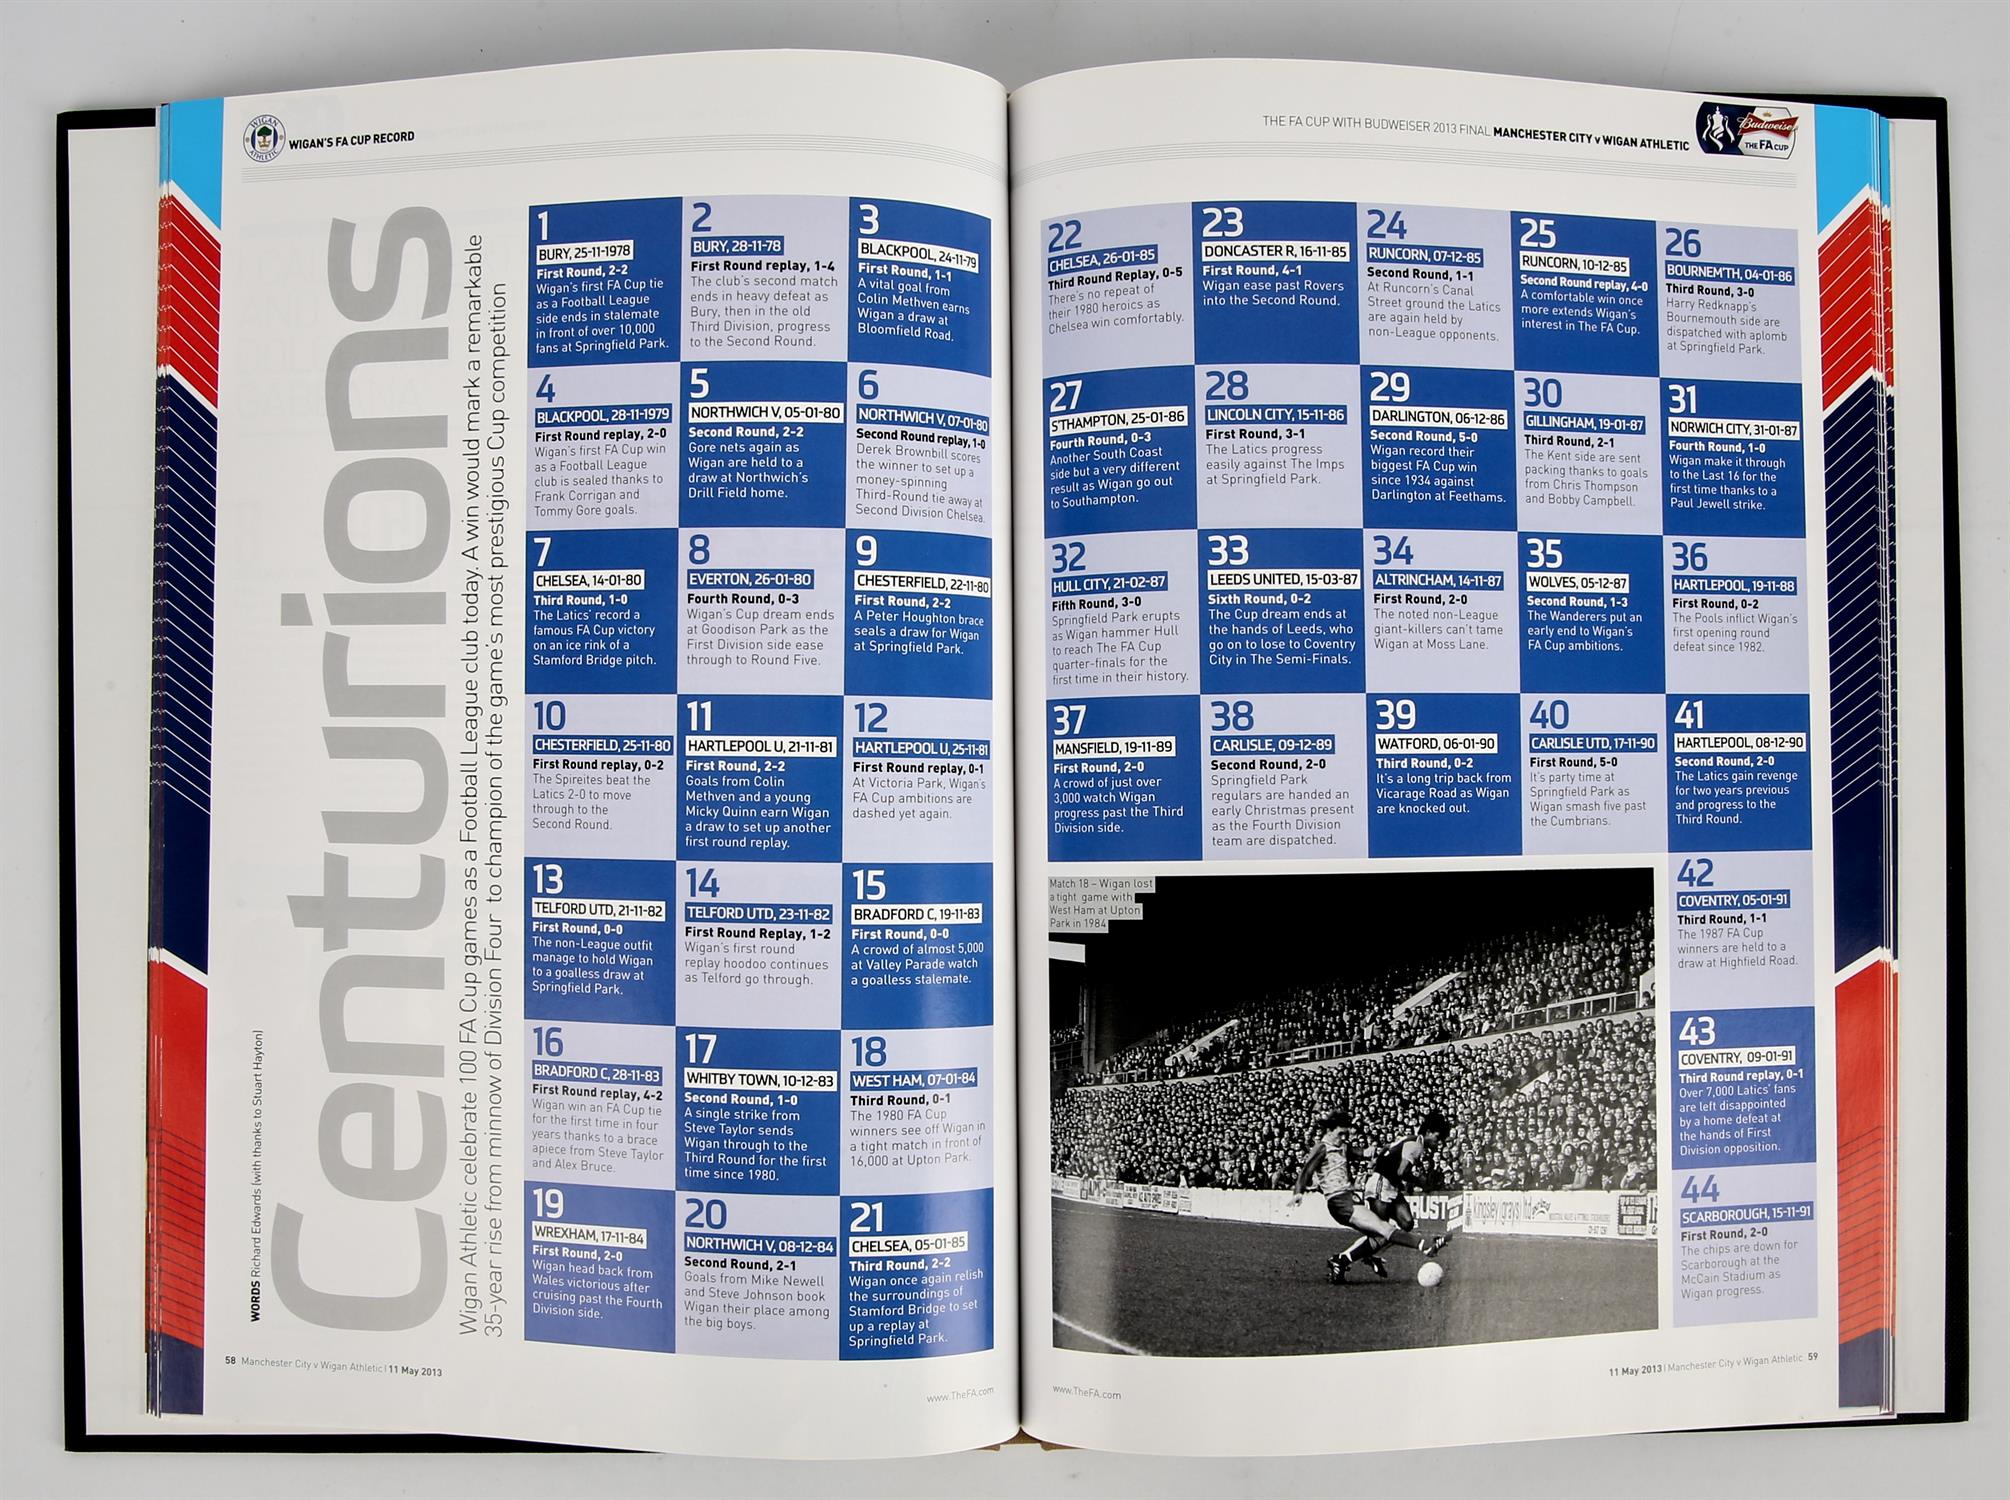 150 years of the FA - Special FA Cup with Budweiser 2013 Final Book - Manchester City v Wigan - Image 3 of 3